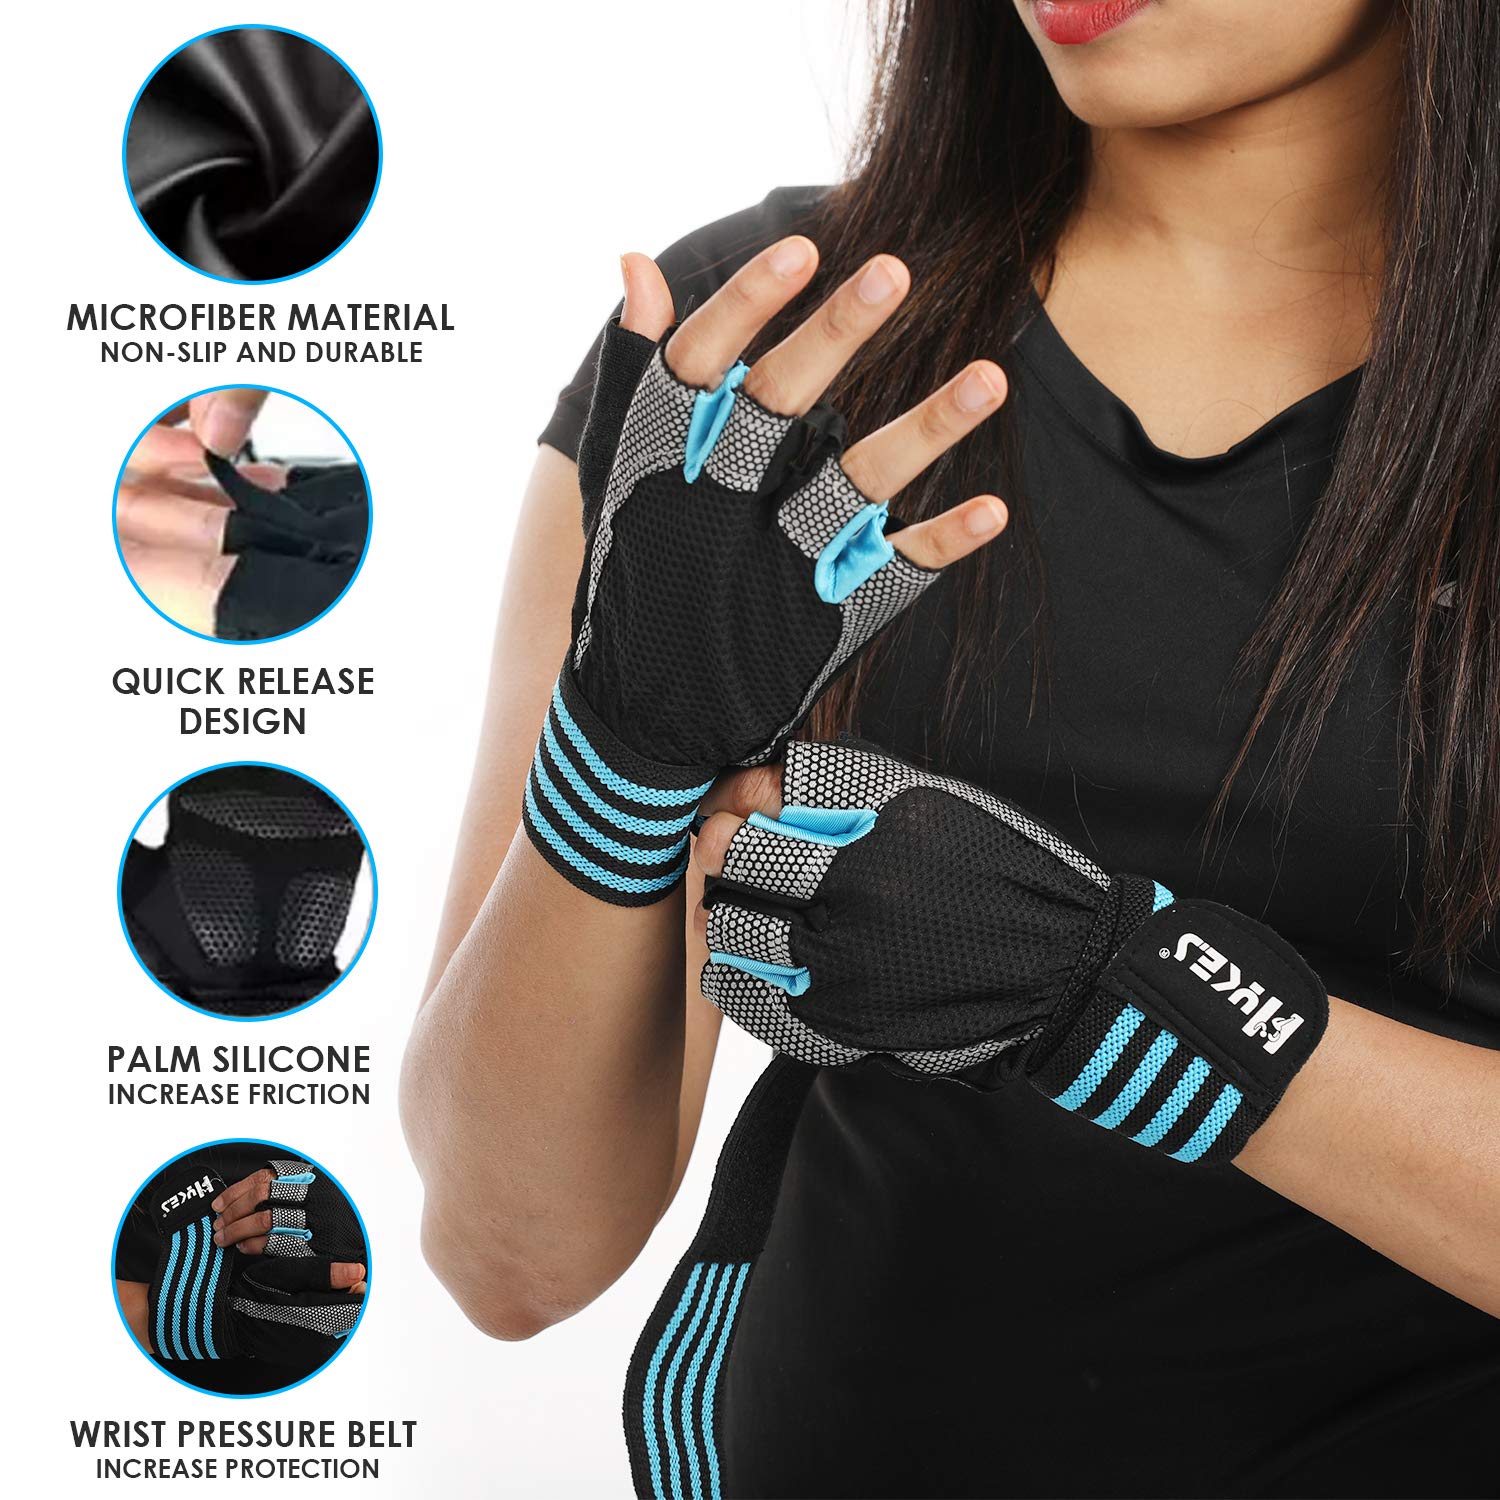 Gym Gloves with Wrist Support - Blue